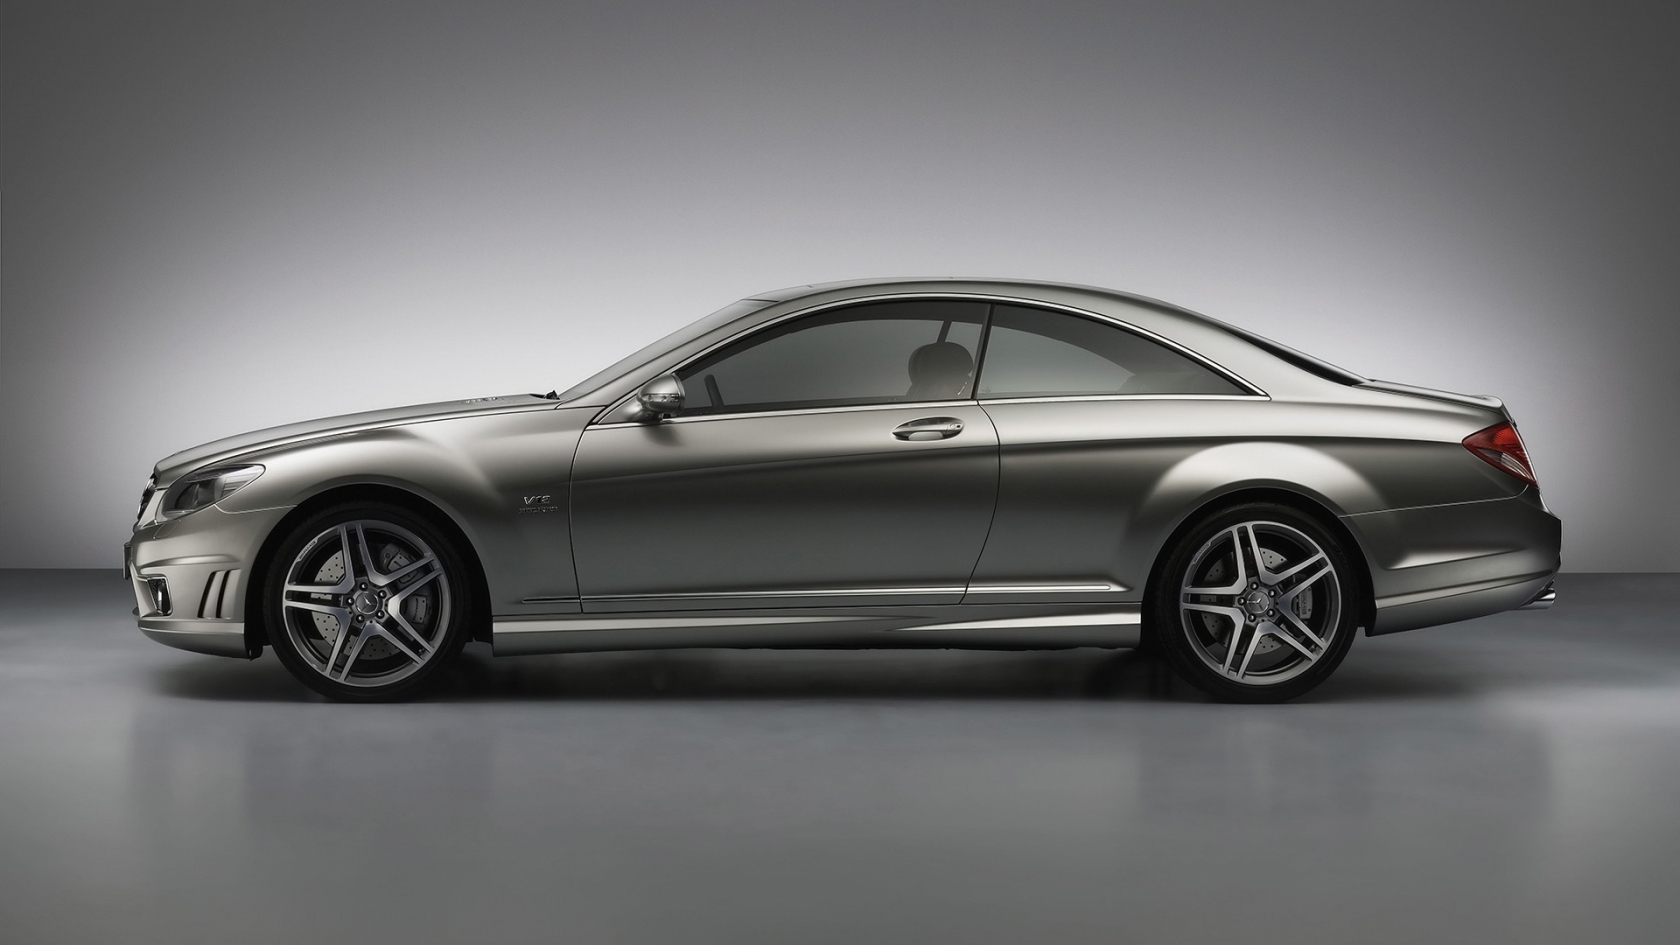 Mercedes Benz CL65 AMG 2008 for 1680 x 945 HDTV resolution